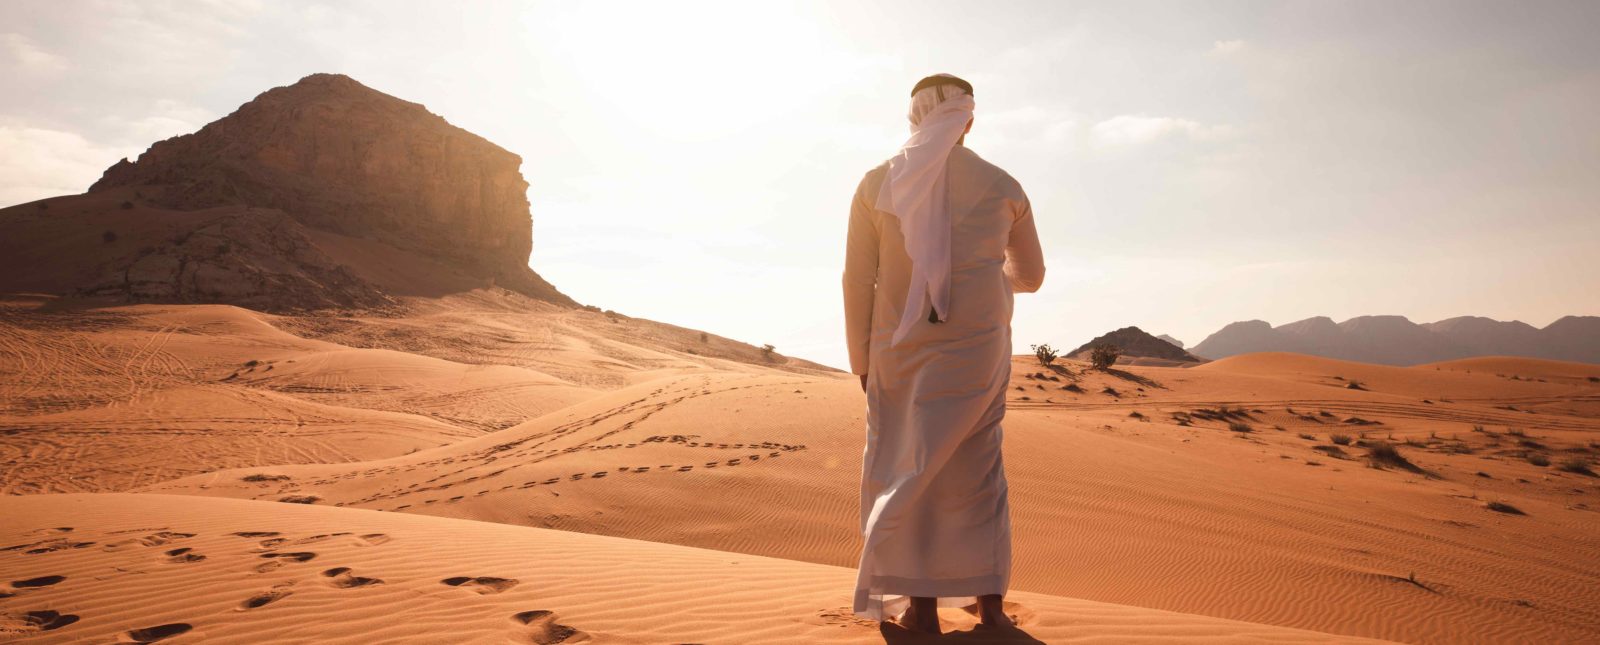 Arab man stands alone in the desert and watching the sunset.